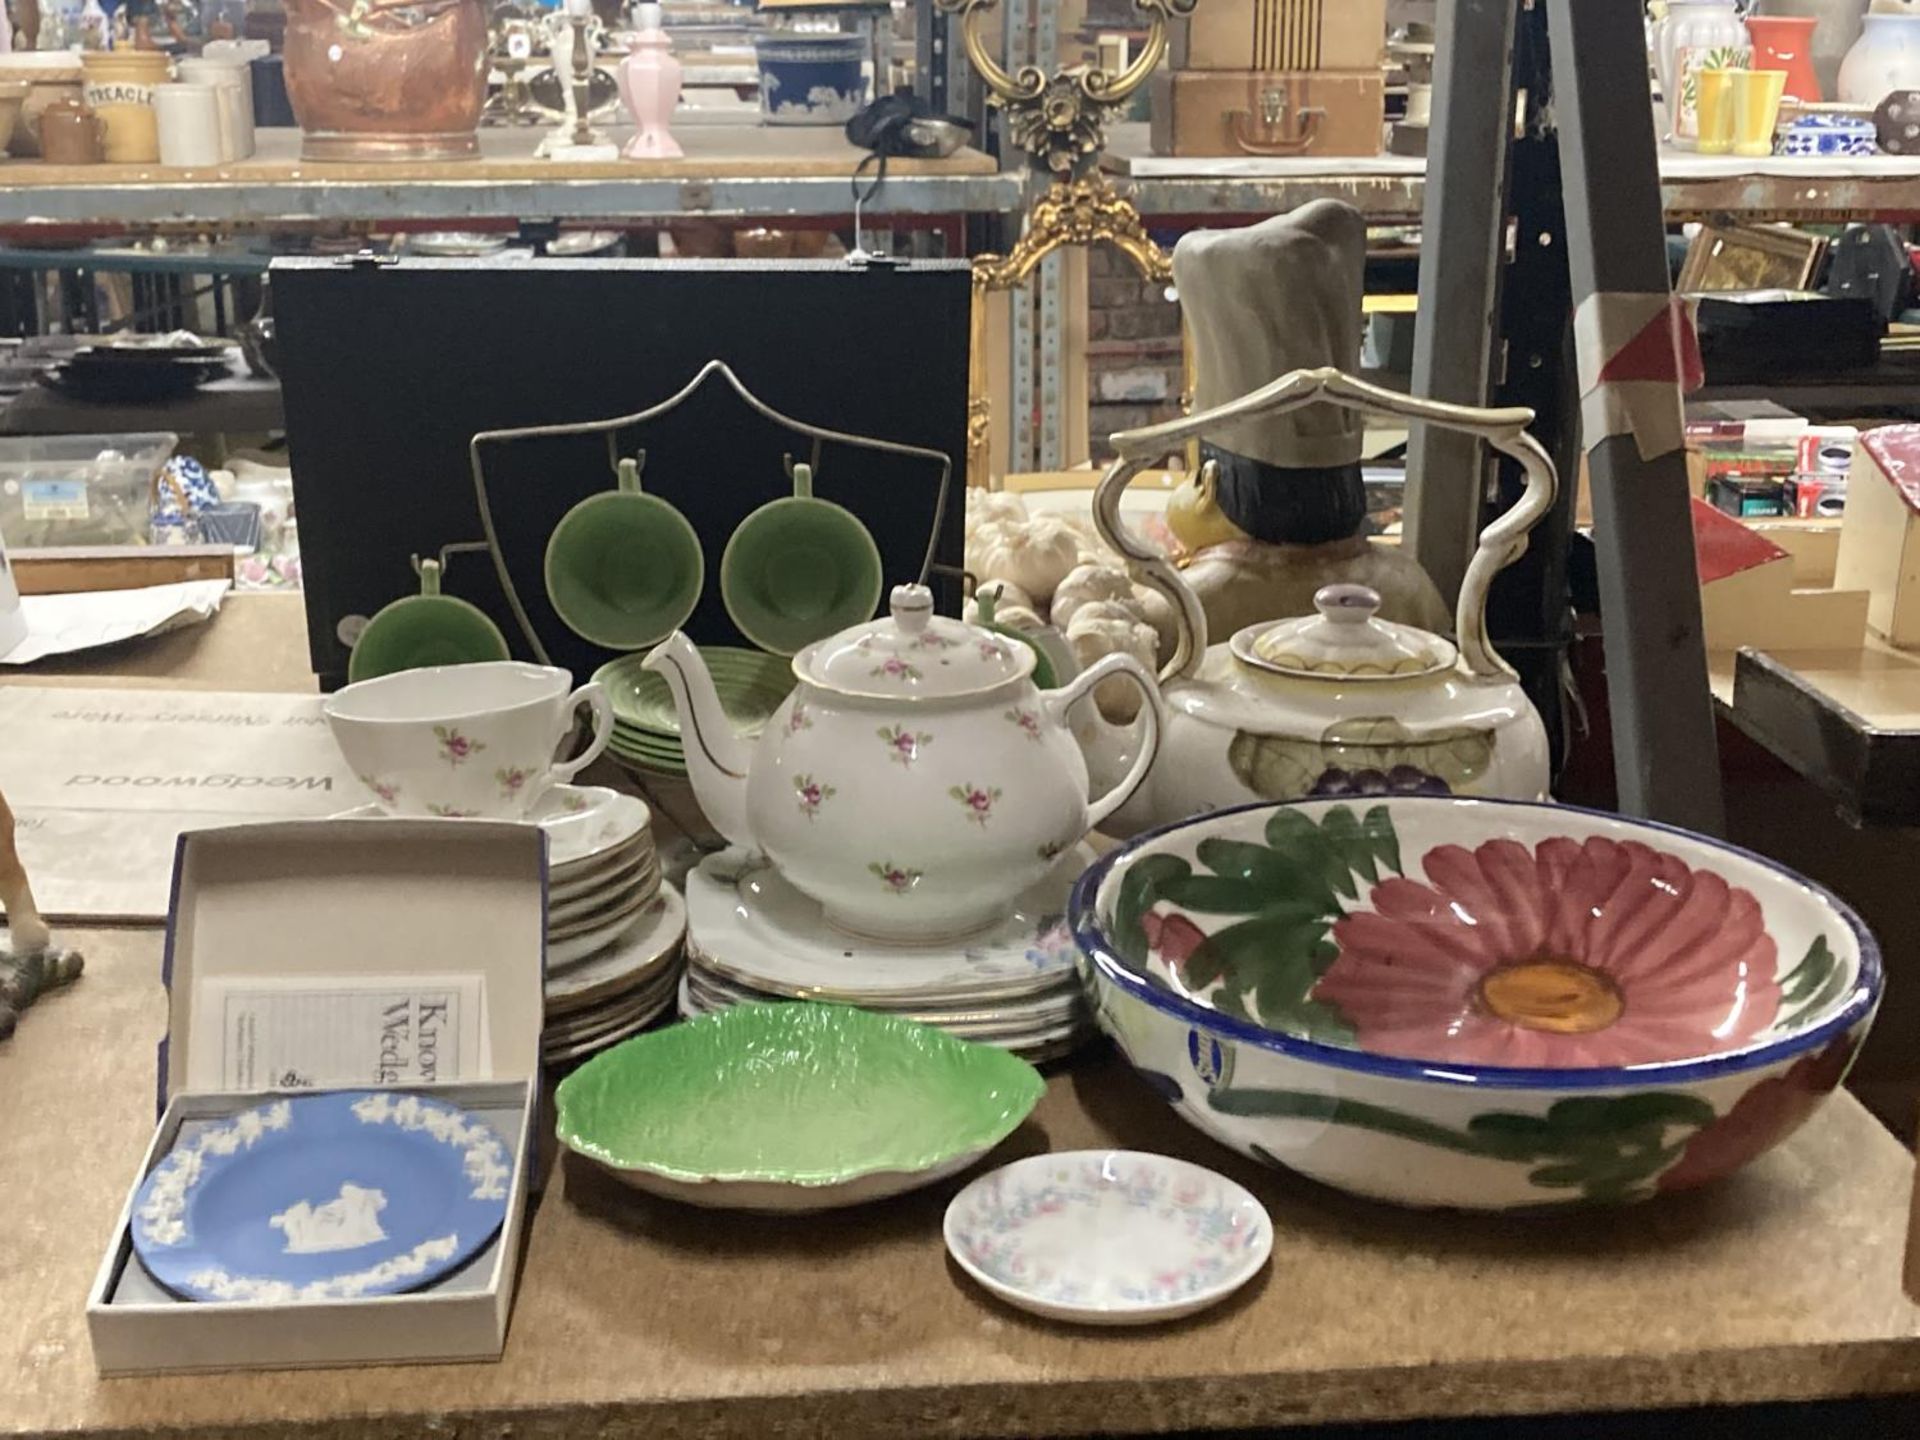 VARIOUS CERAMICS TO INCLUDE WEDGWOOD, CARLTON WARE, A RETRO METAL STAND WITH CUPS AND SAUCERS ETC